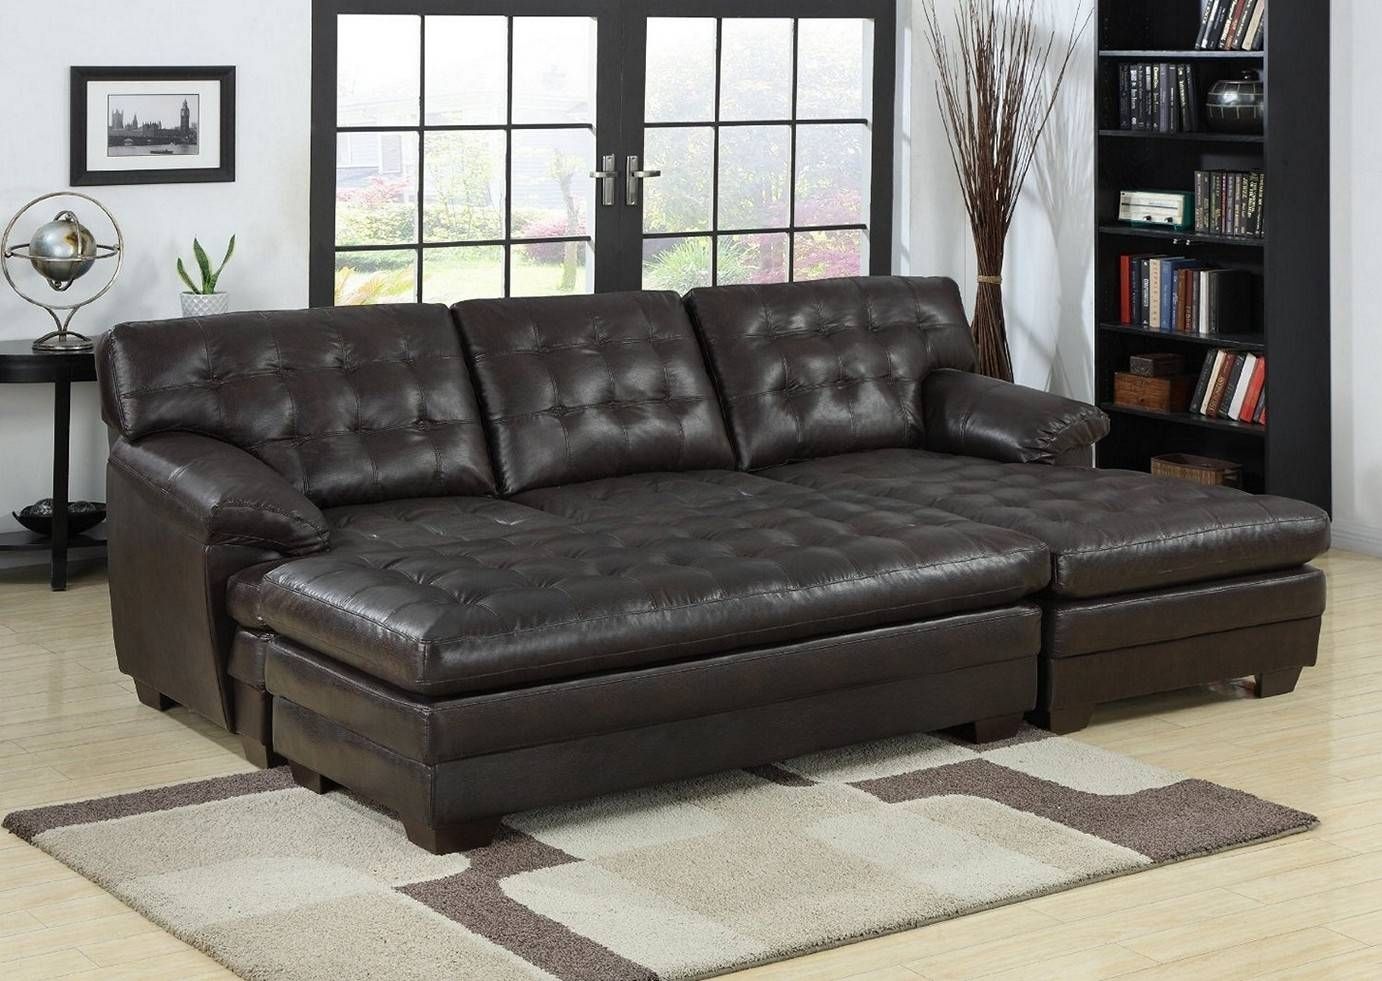 Sofas Center : Chaise Lounge Sofa With Storage Costco Beds World With Sofa Lounger Beds (View 2 of 30)